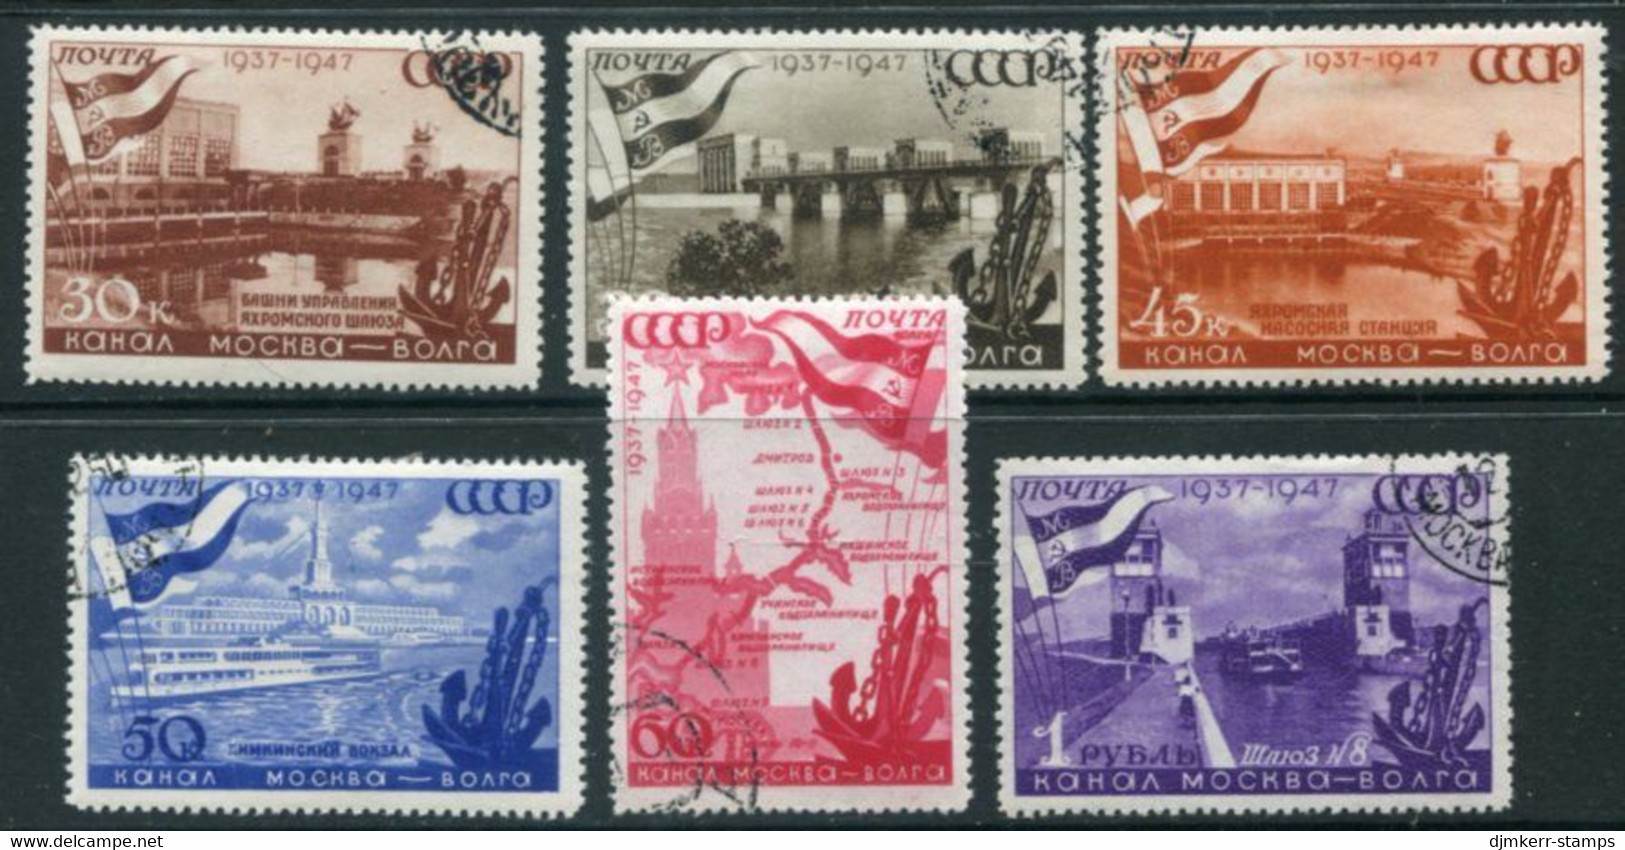 SOVIET UNION 1947 Moscow-Volga Canal Used.  Michel  1131-36 - Used Stamps